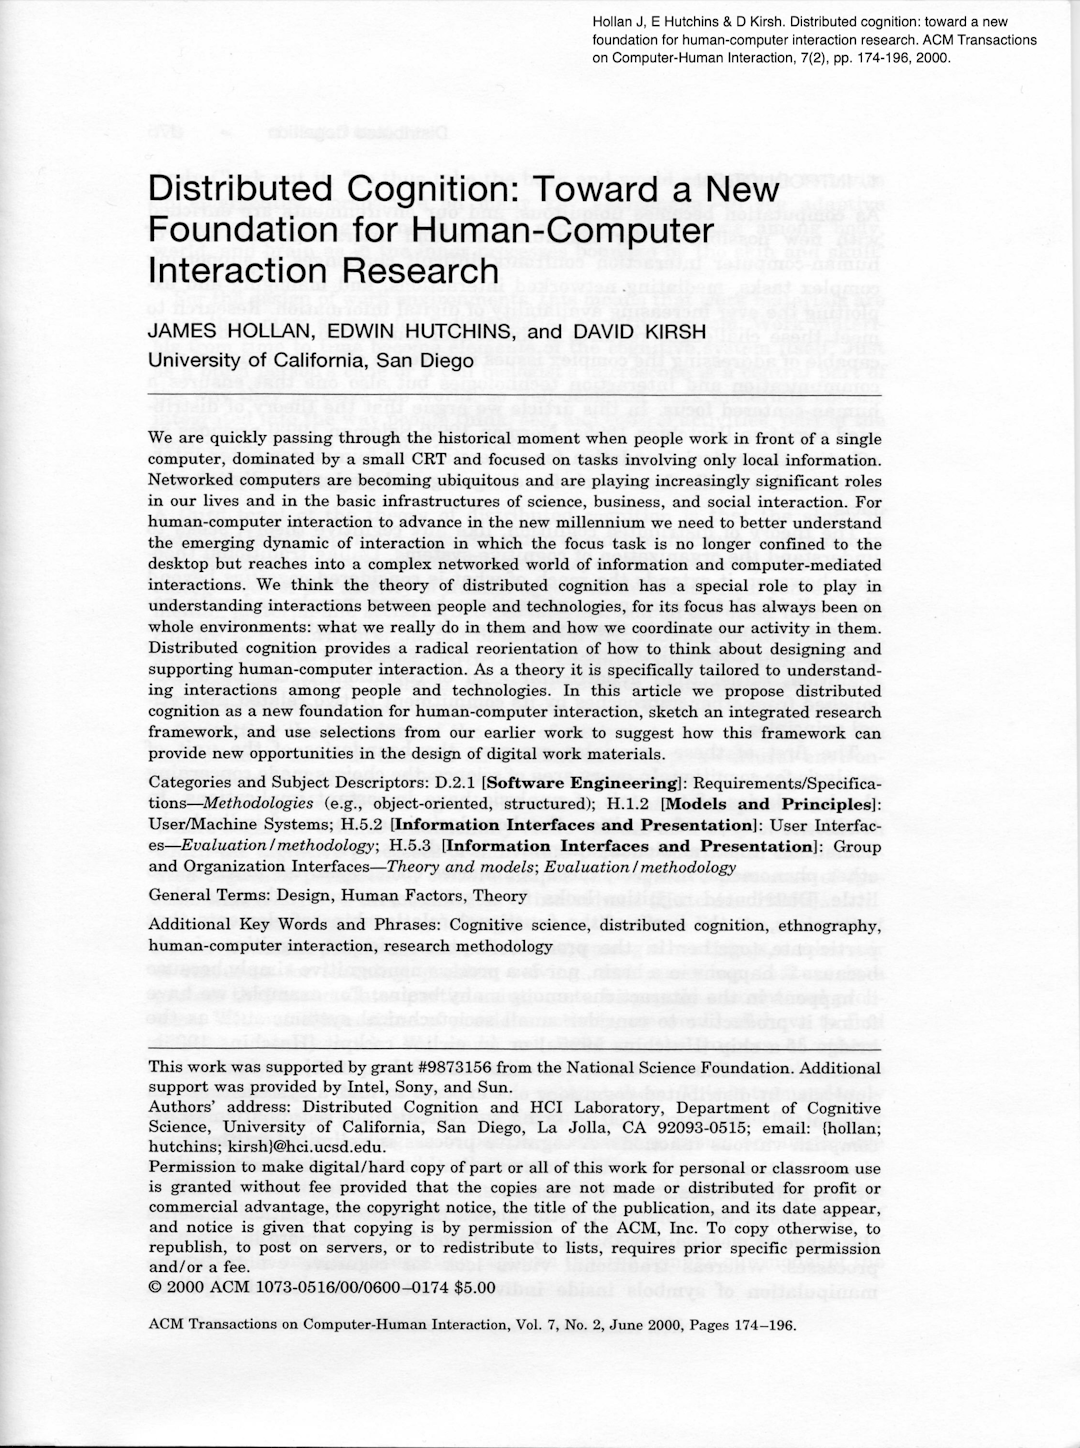 Distributed Cognition: Toward a New Foundation for Human-Computer Interaction Research